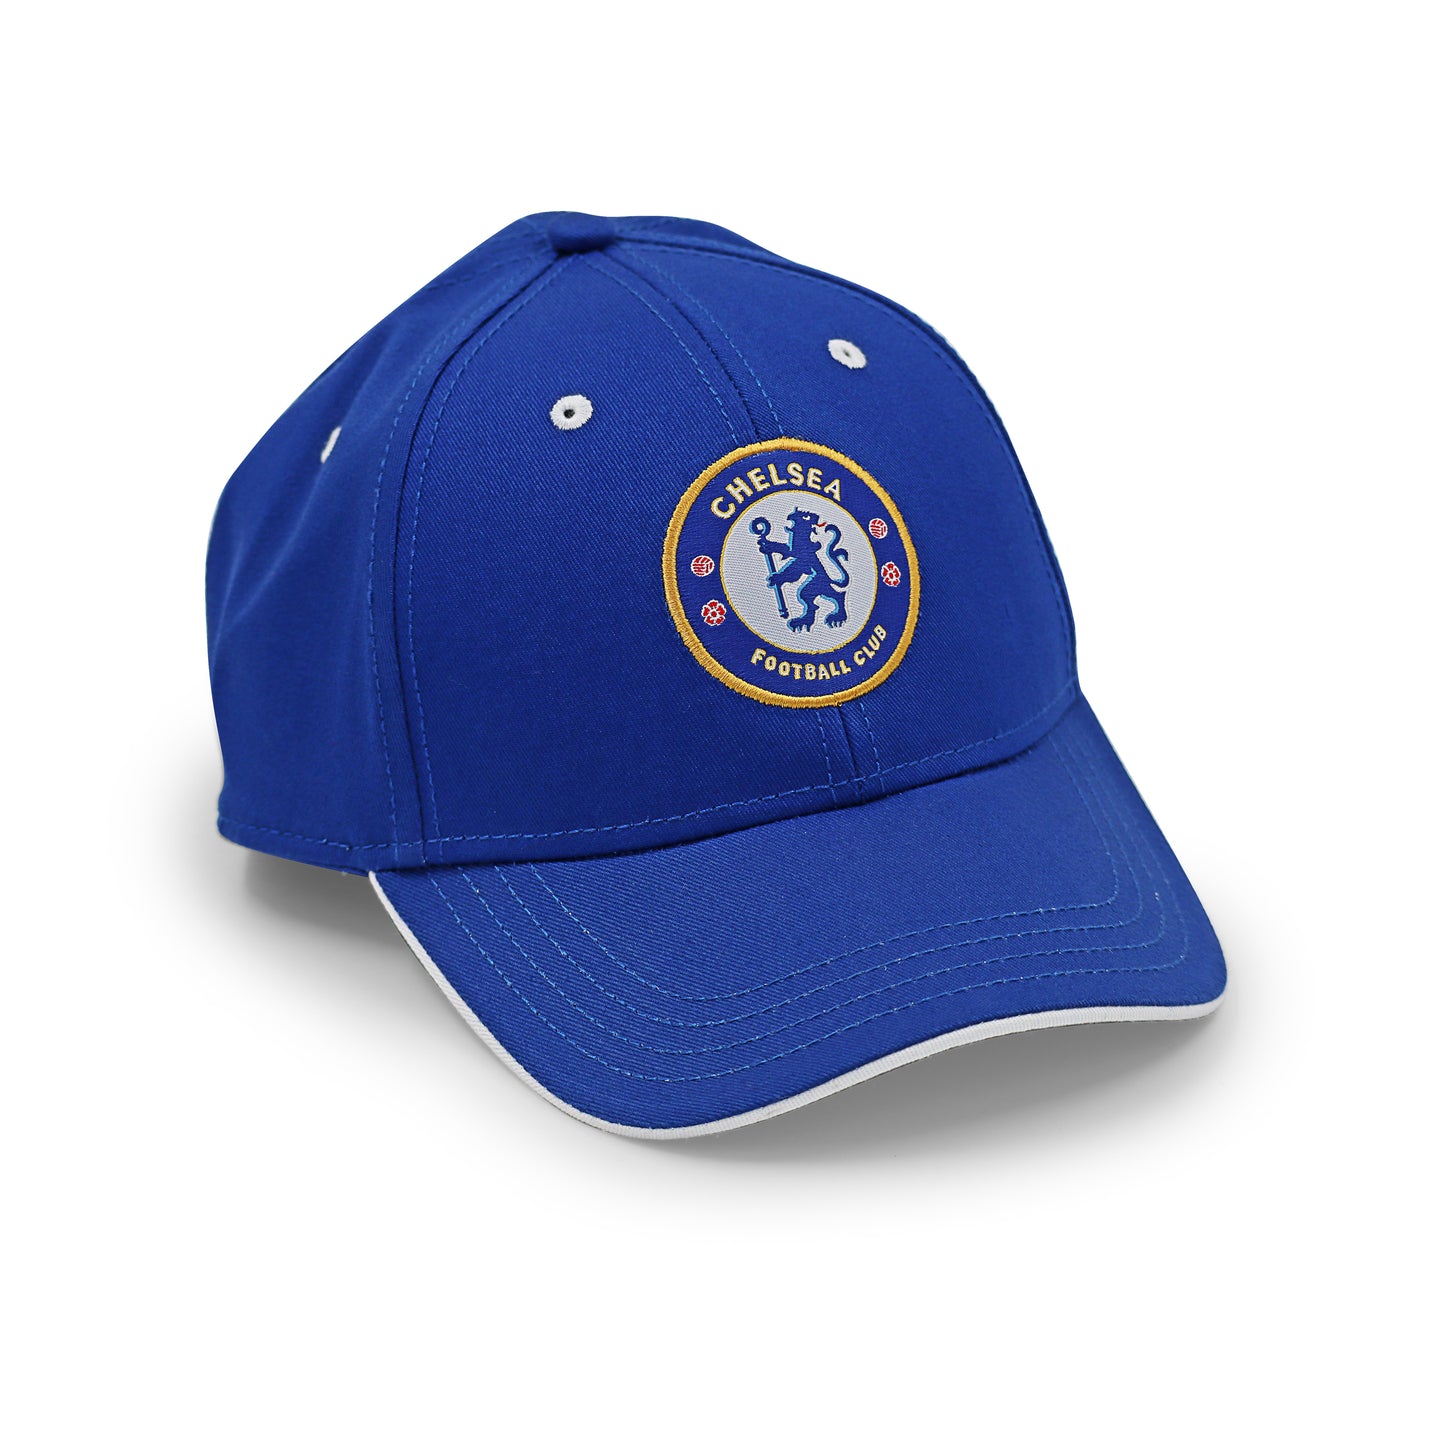 Chelsea Football Club Cap. Official licensed product.